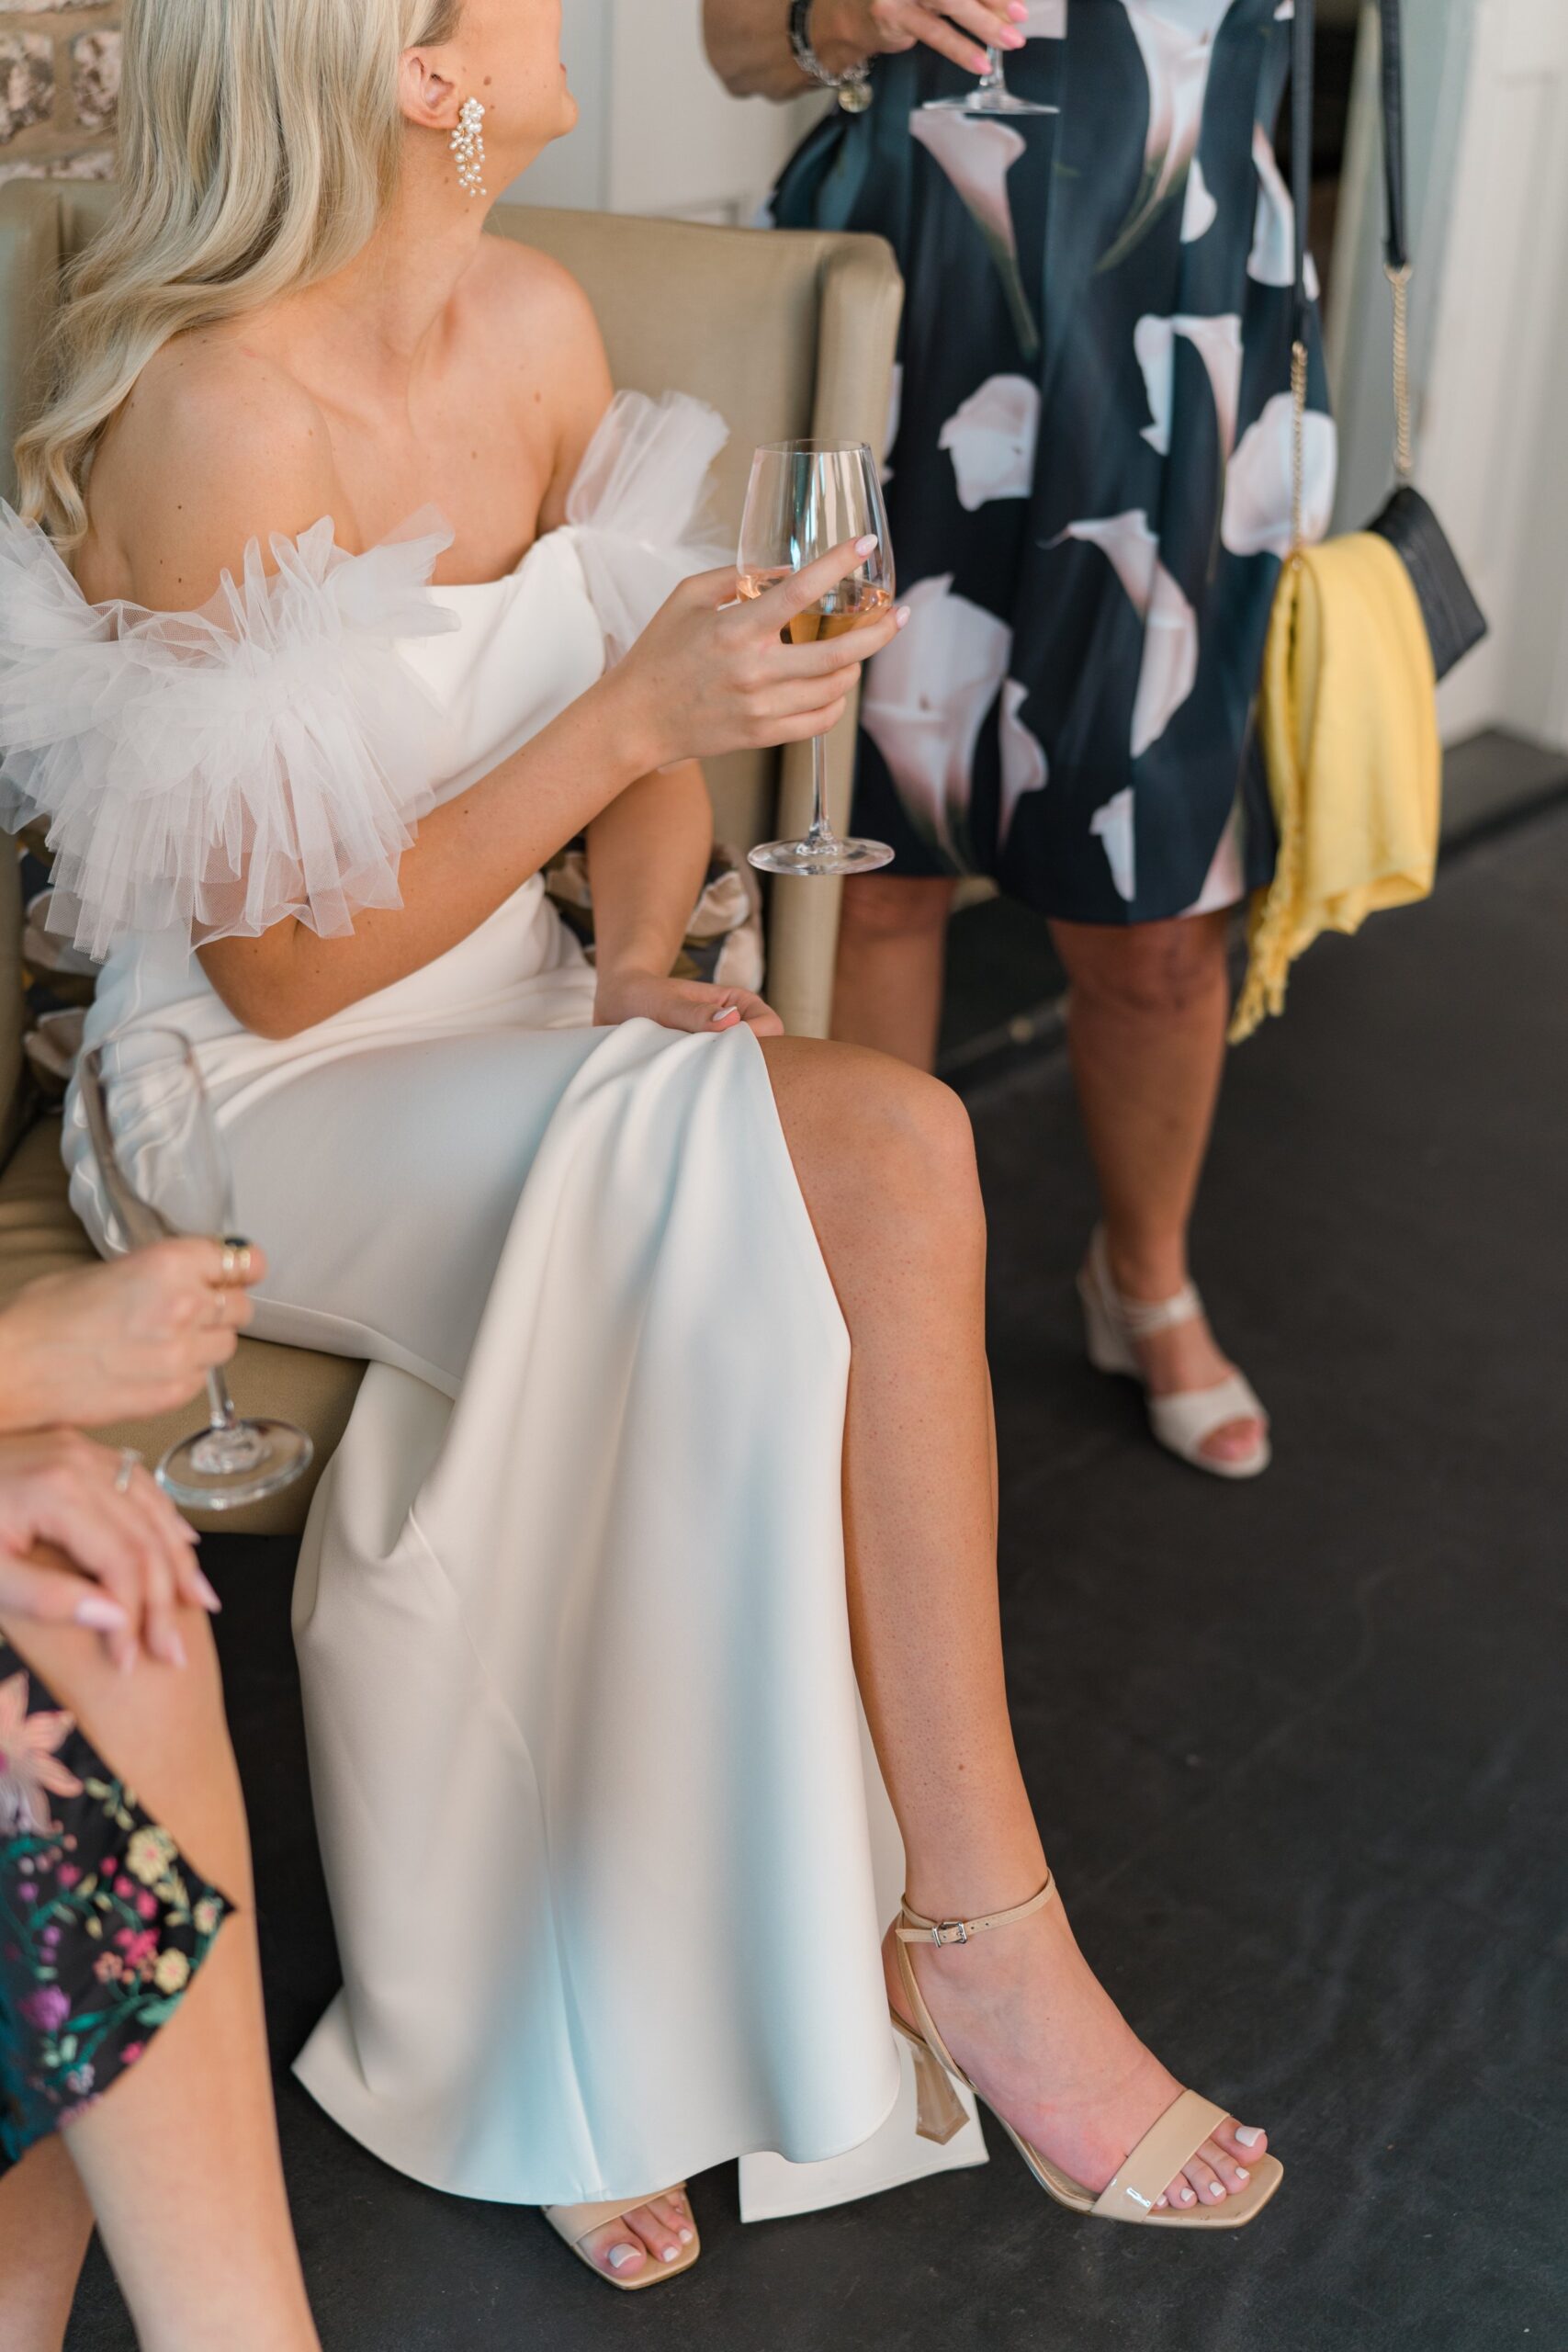 charleston rehearsal dinner outfit inspiration for brides.